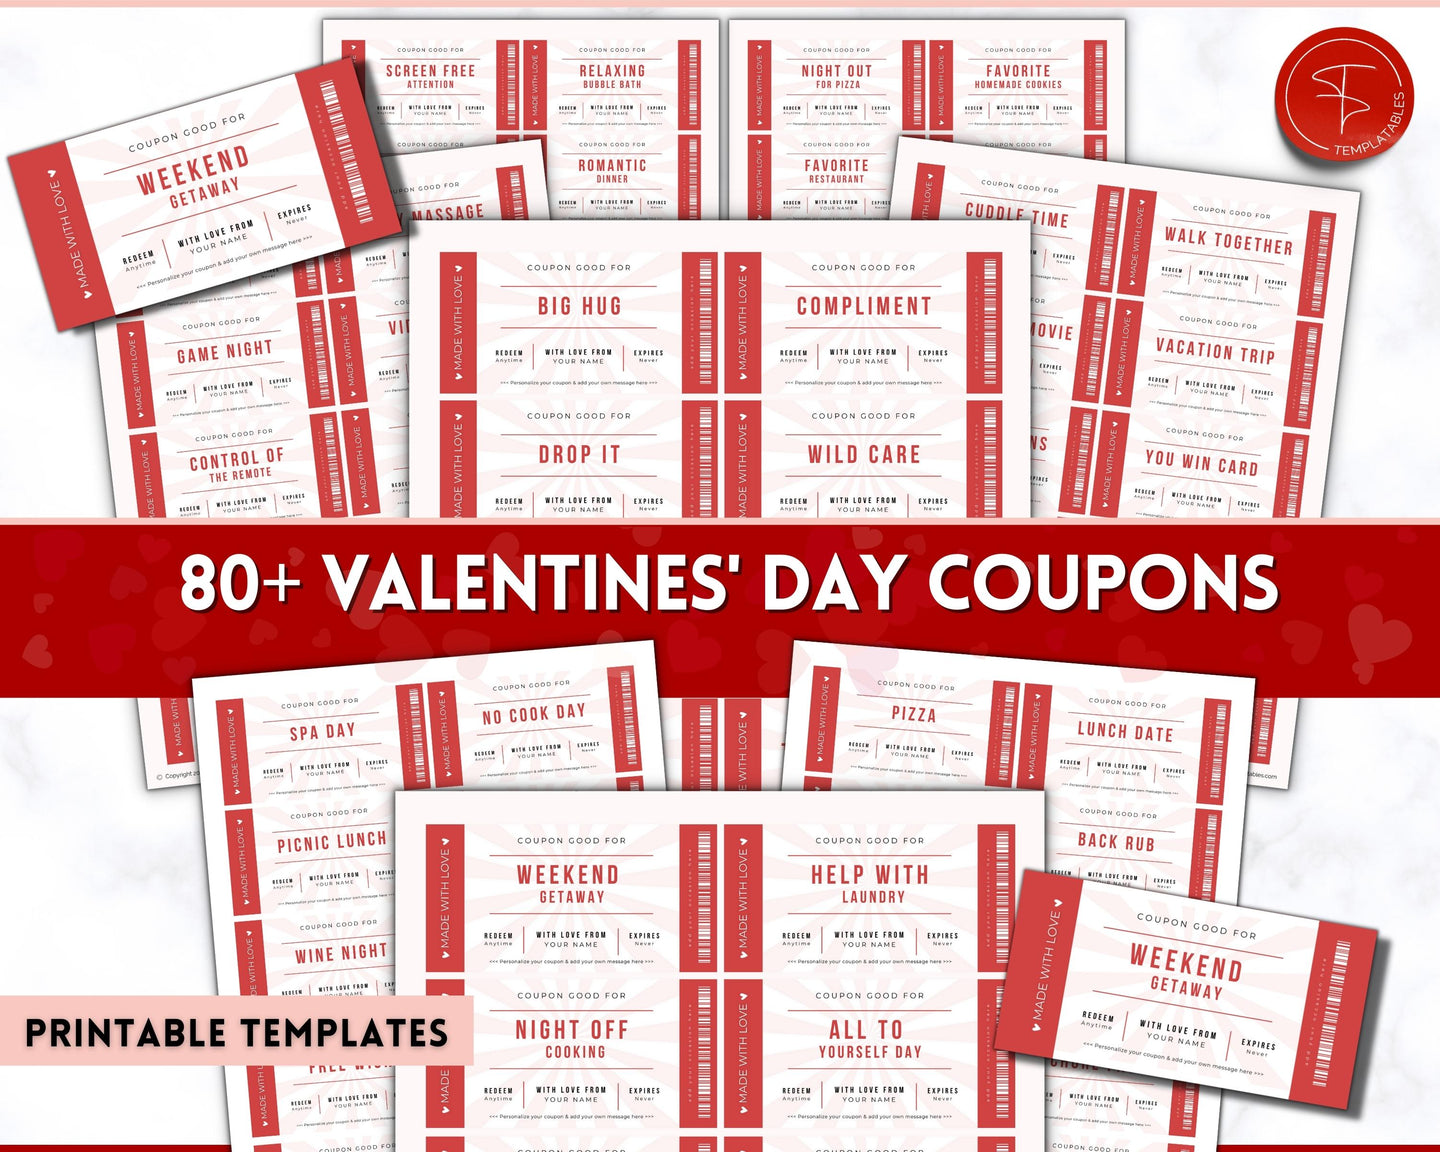 Editable Love Coupon Book for Valentines | Printable DIY Coupon Book for Him and Her | Personalized Valentines, Anniversary, Birthday Gift | Red